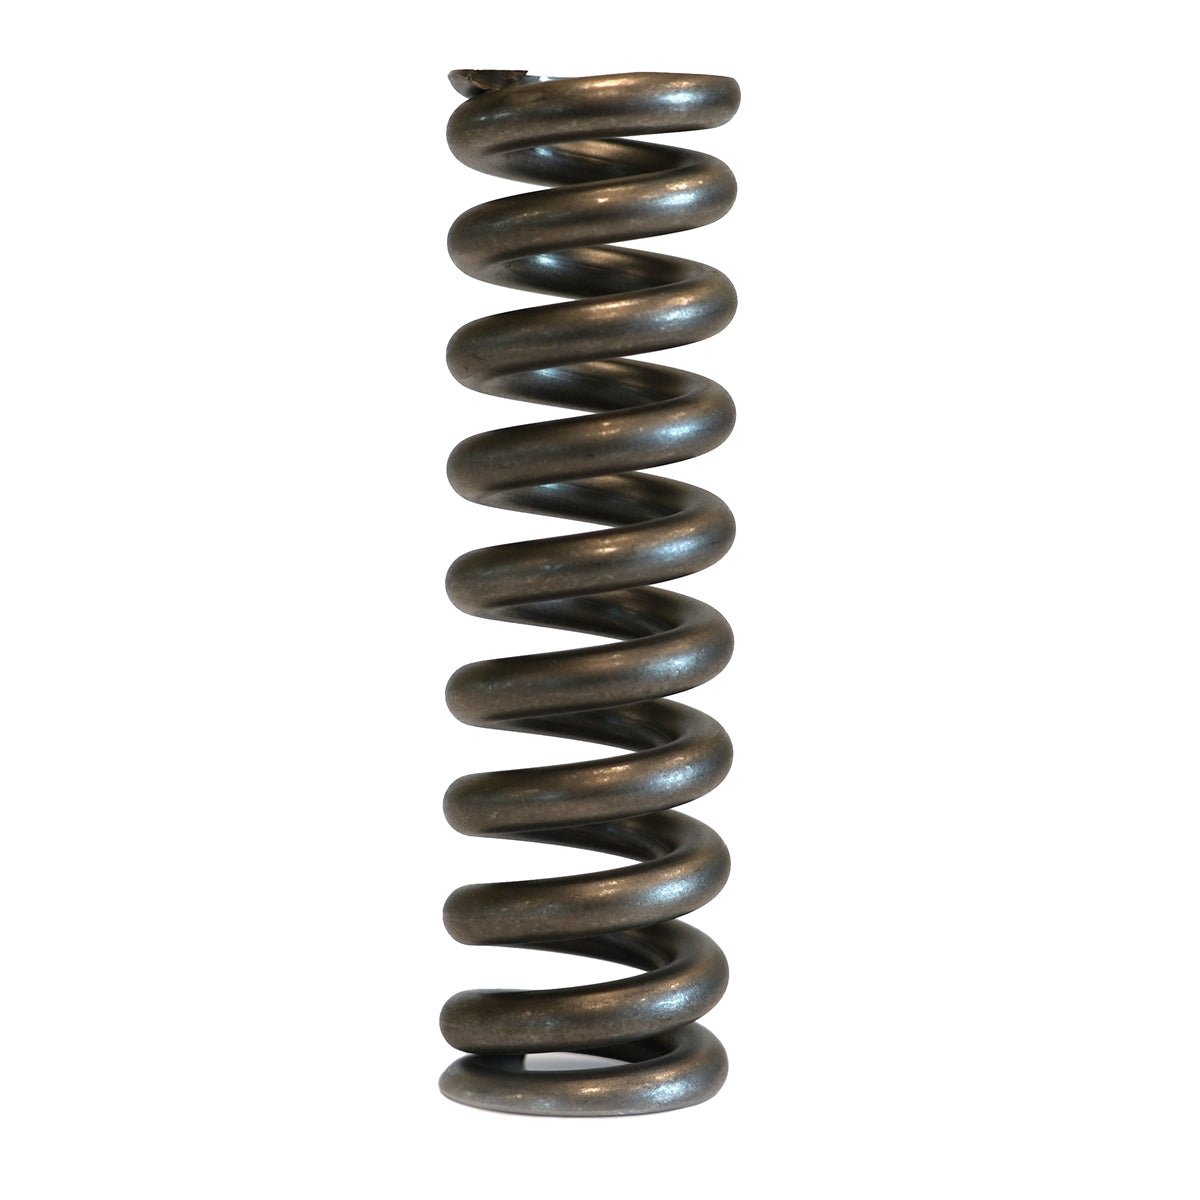 Alaska Gear Company Approved OEM Replacement Maule Oleo Spring - ABI-4015B